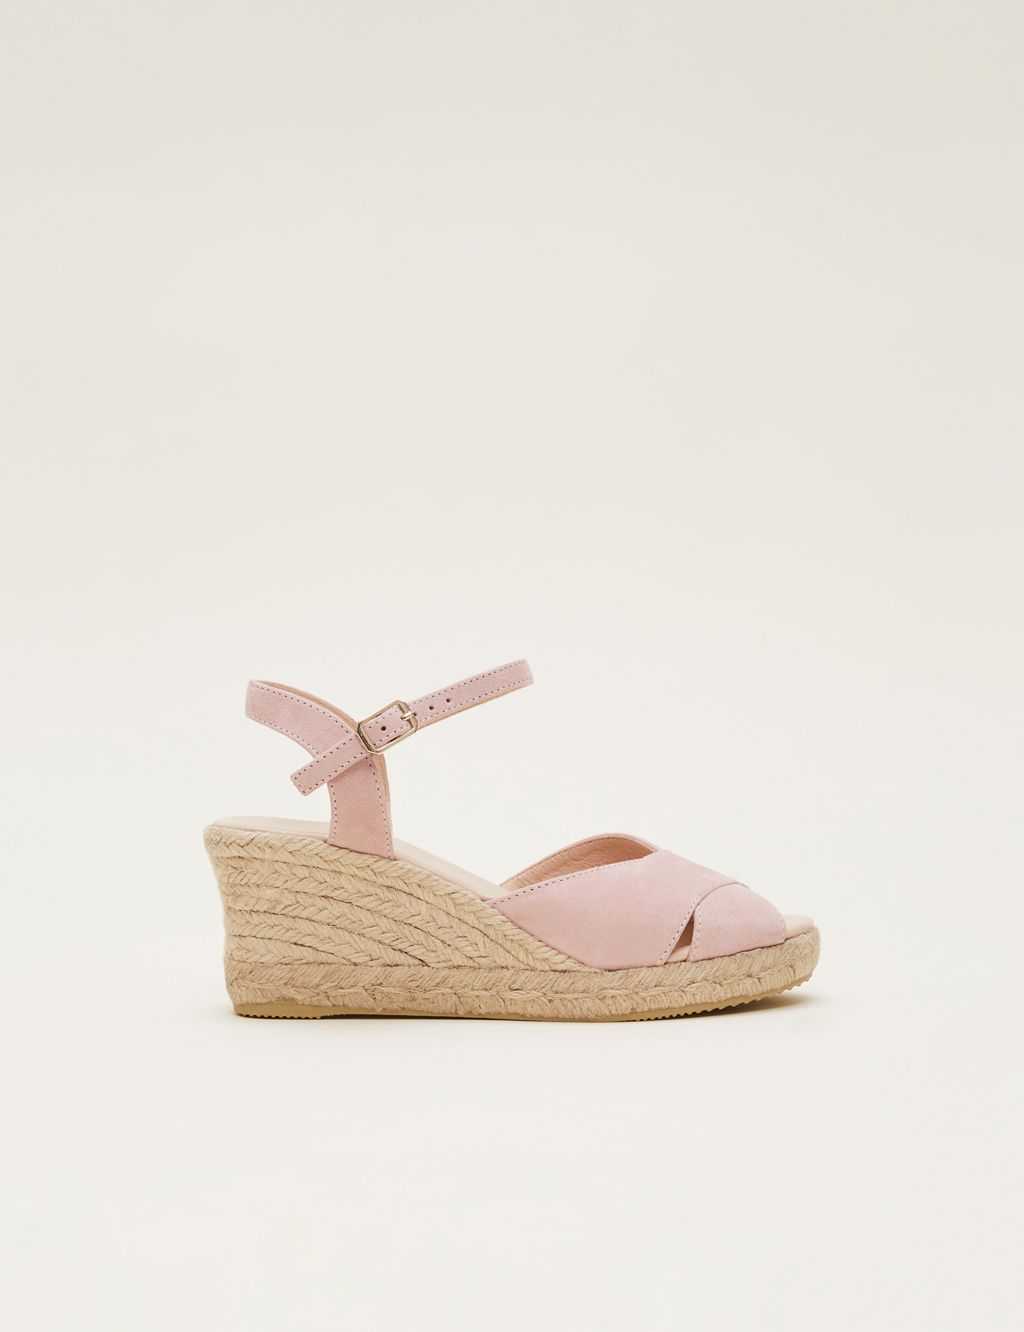 Leather Ankle Strap Wedge Espadrilles